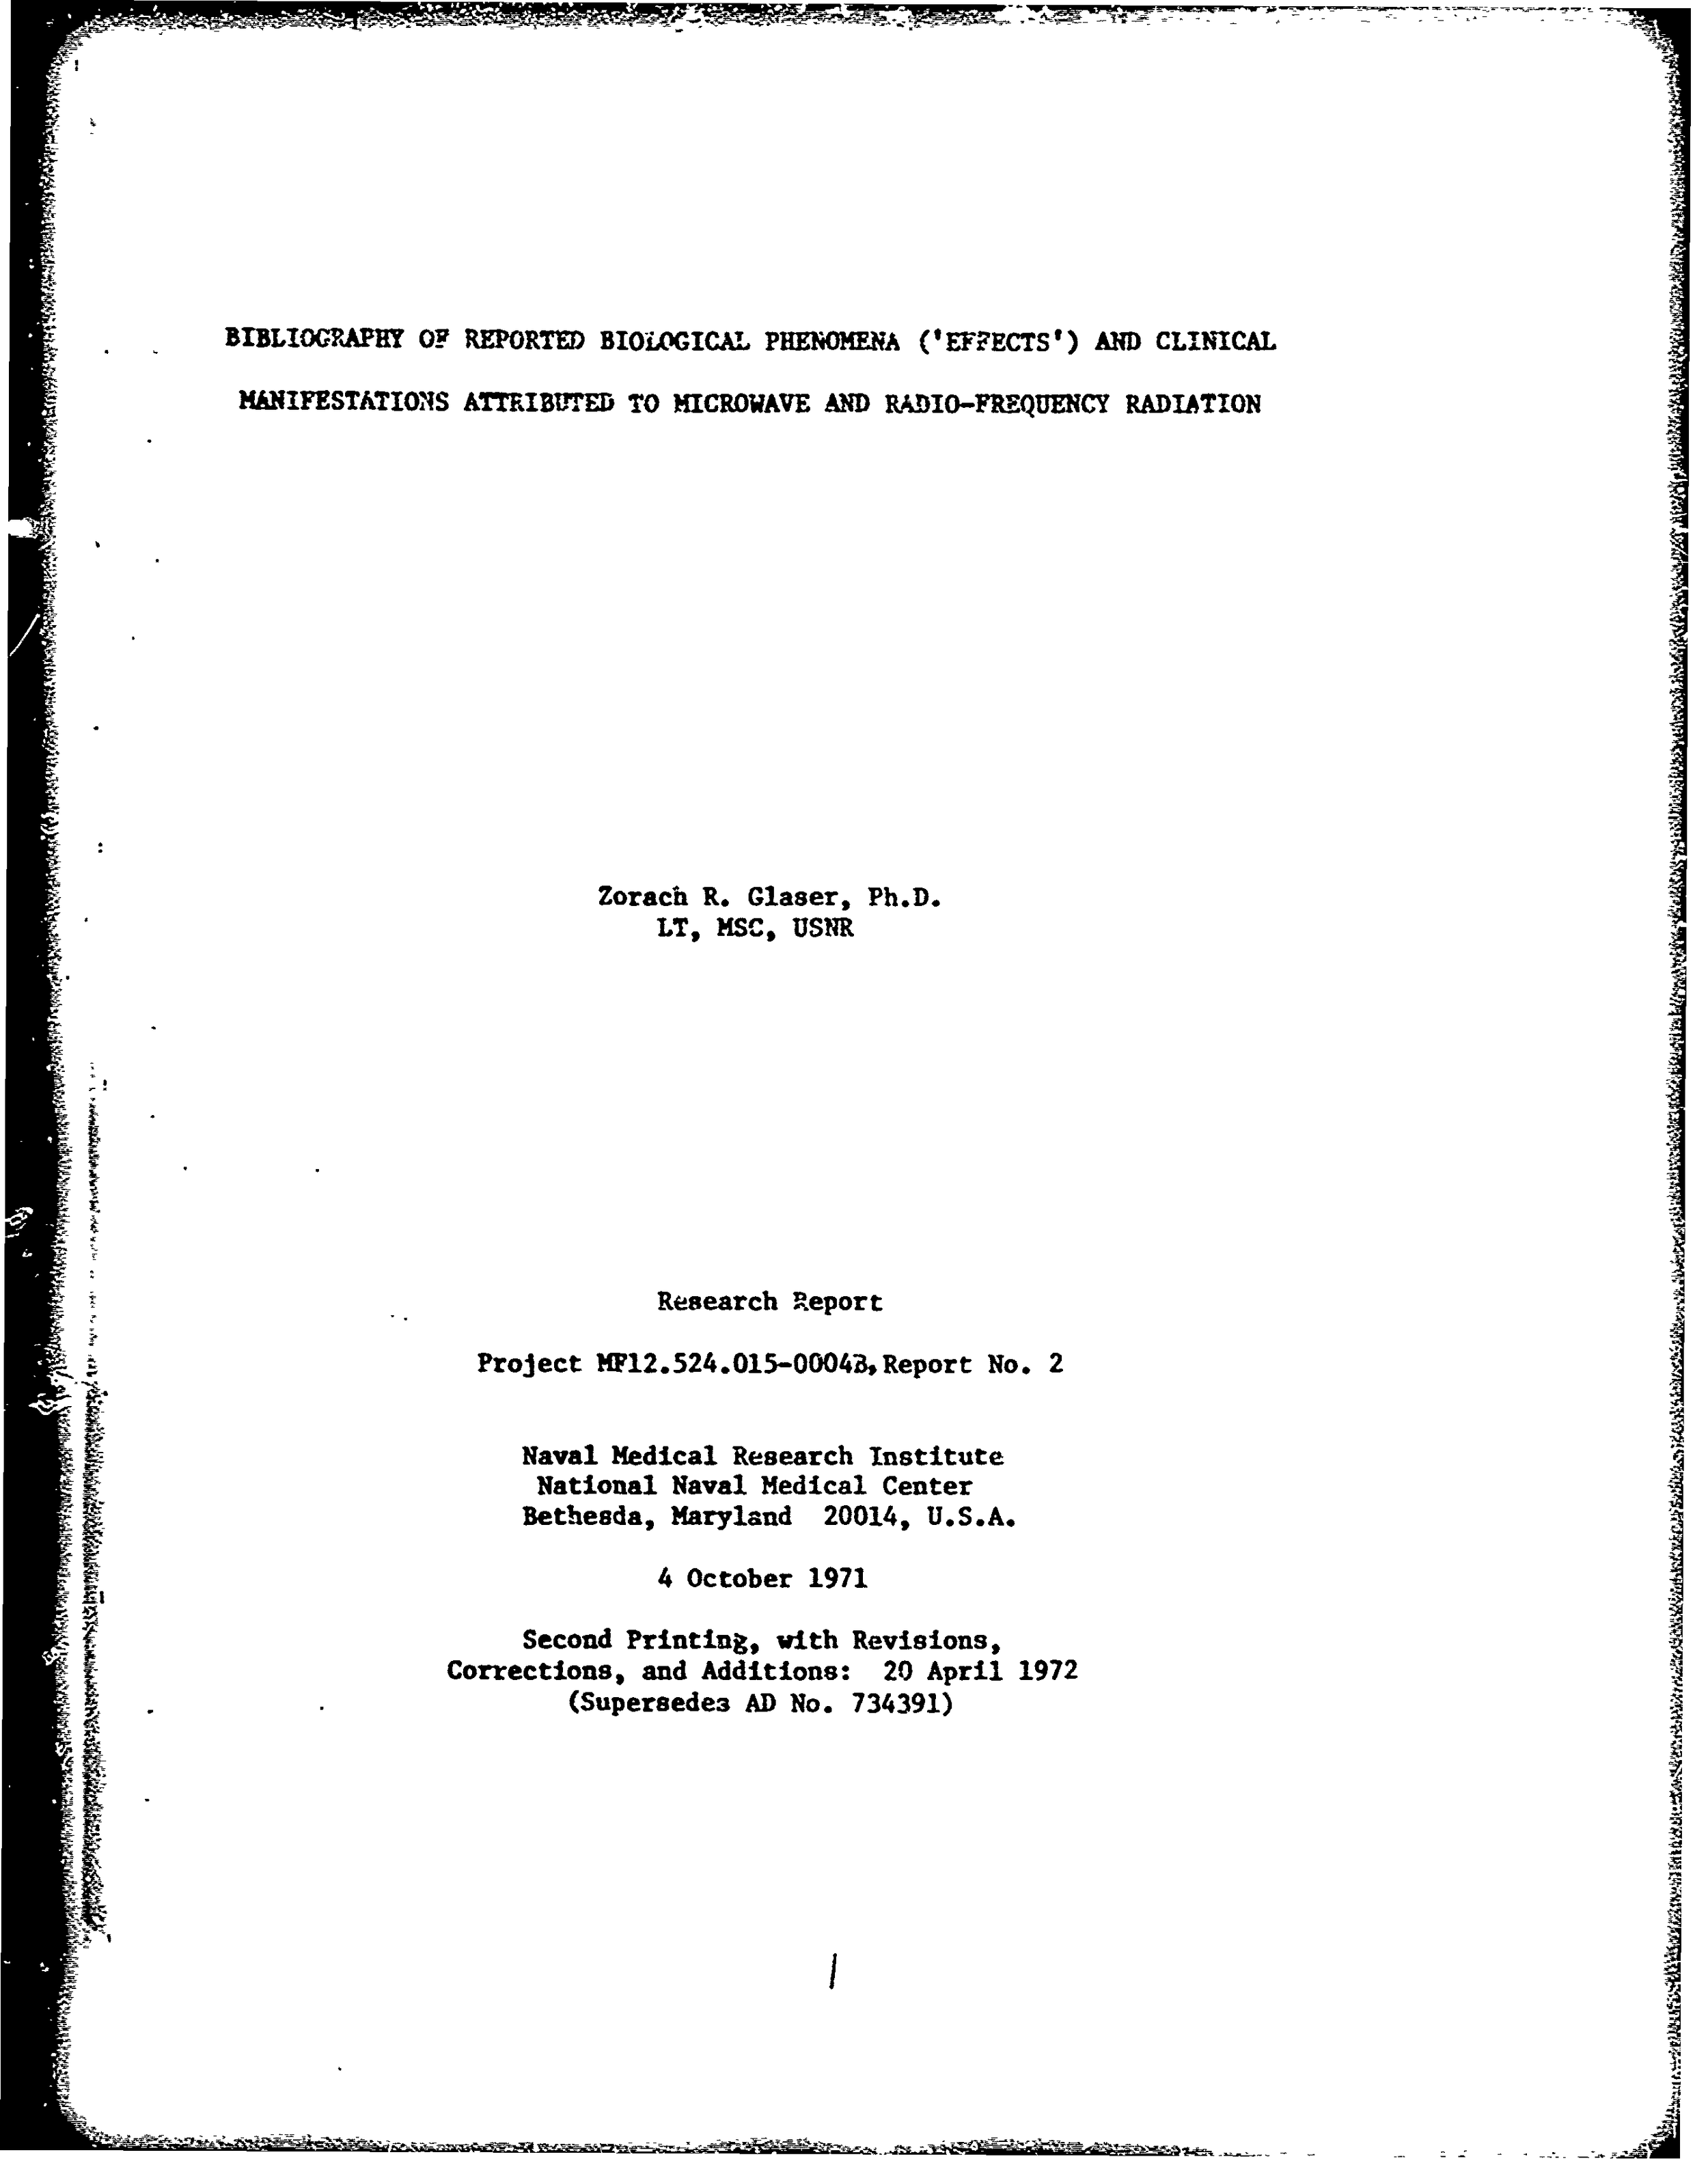 BIBLIOGRAPHY_OF_REPORTED_BIOLOGICAL_PHENOMENA_'EFFECTS'_AND_CLINICAL_Page_02.png